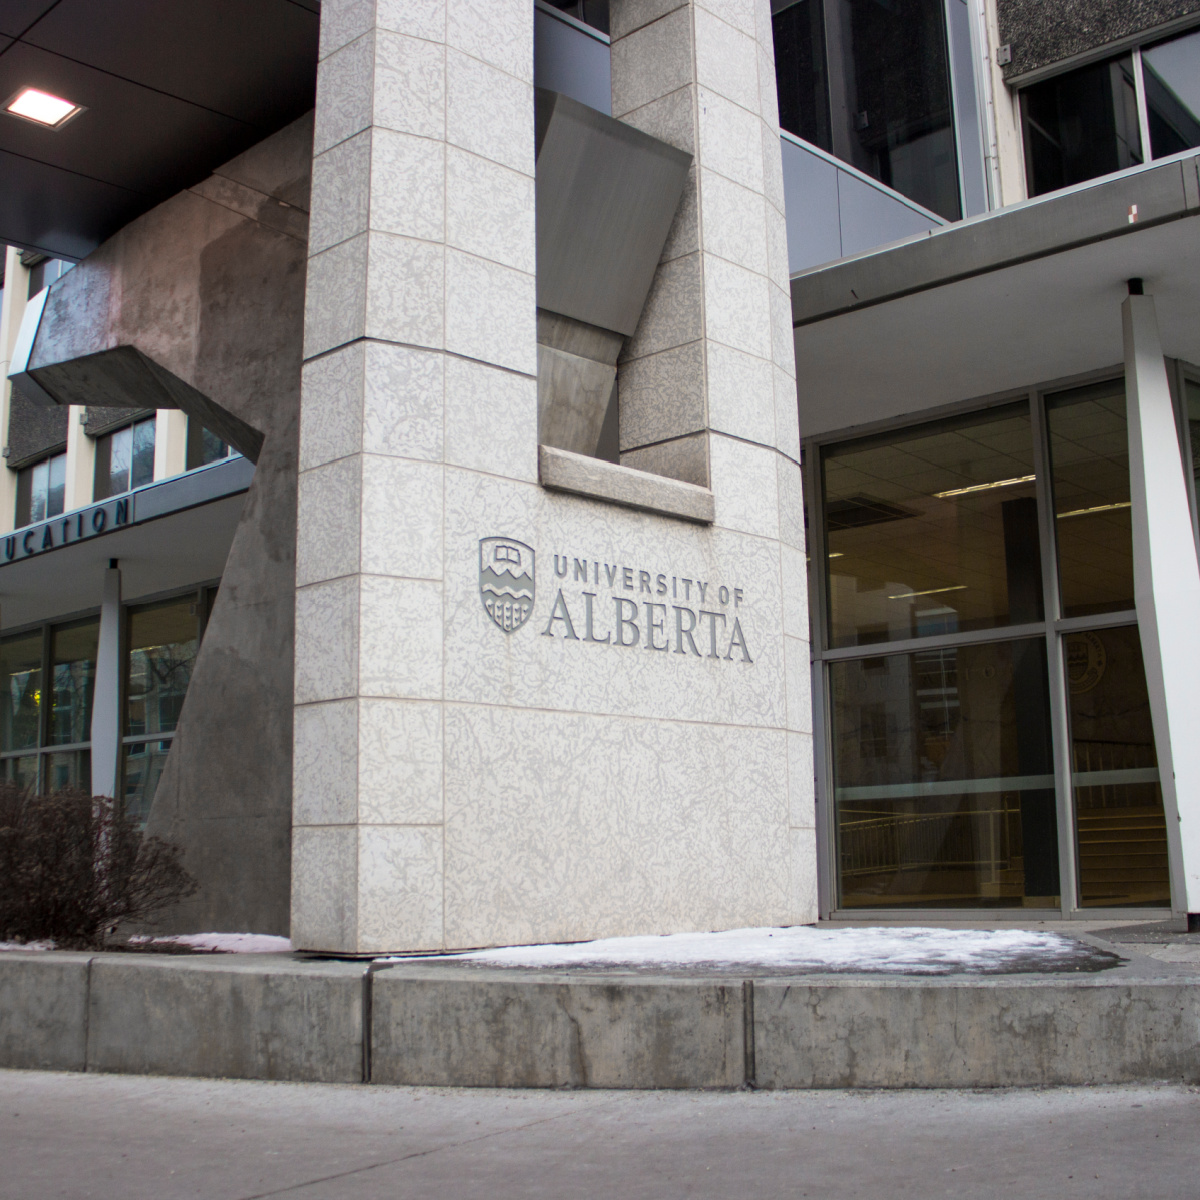 University of Alberta logo engrave on pillar by the entrance to the Faculty of Education